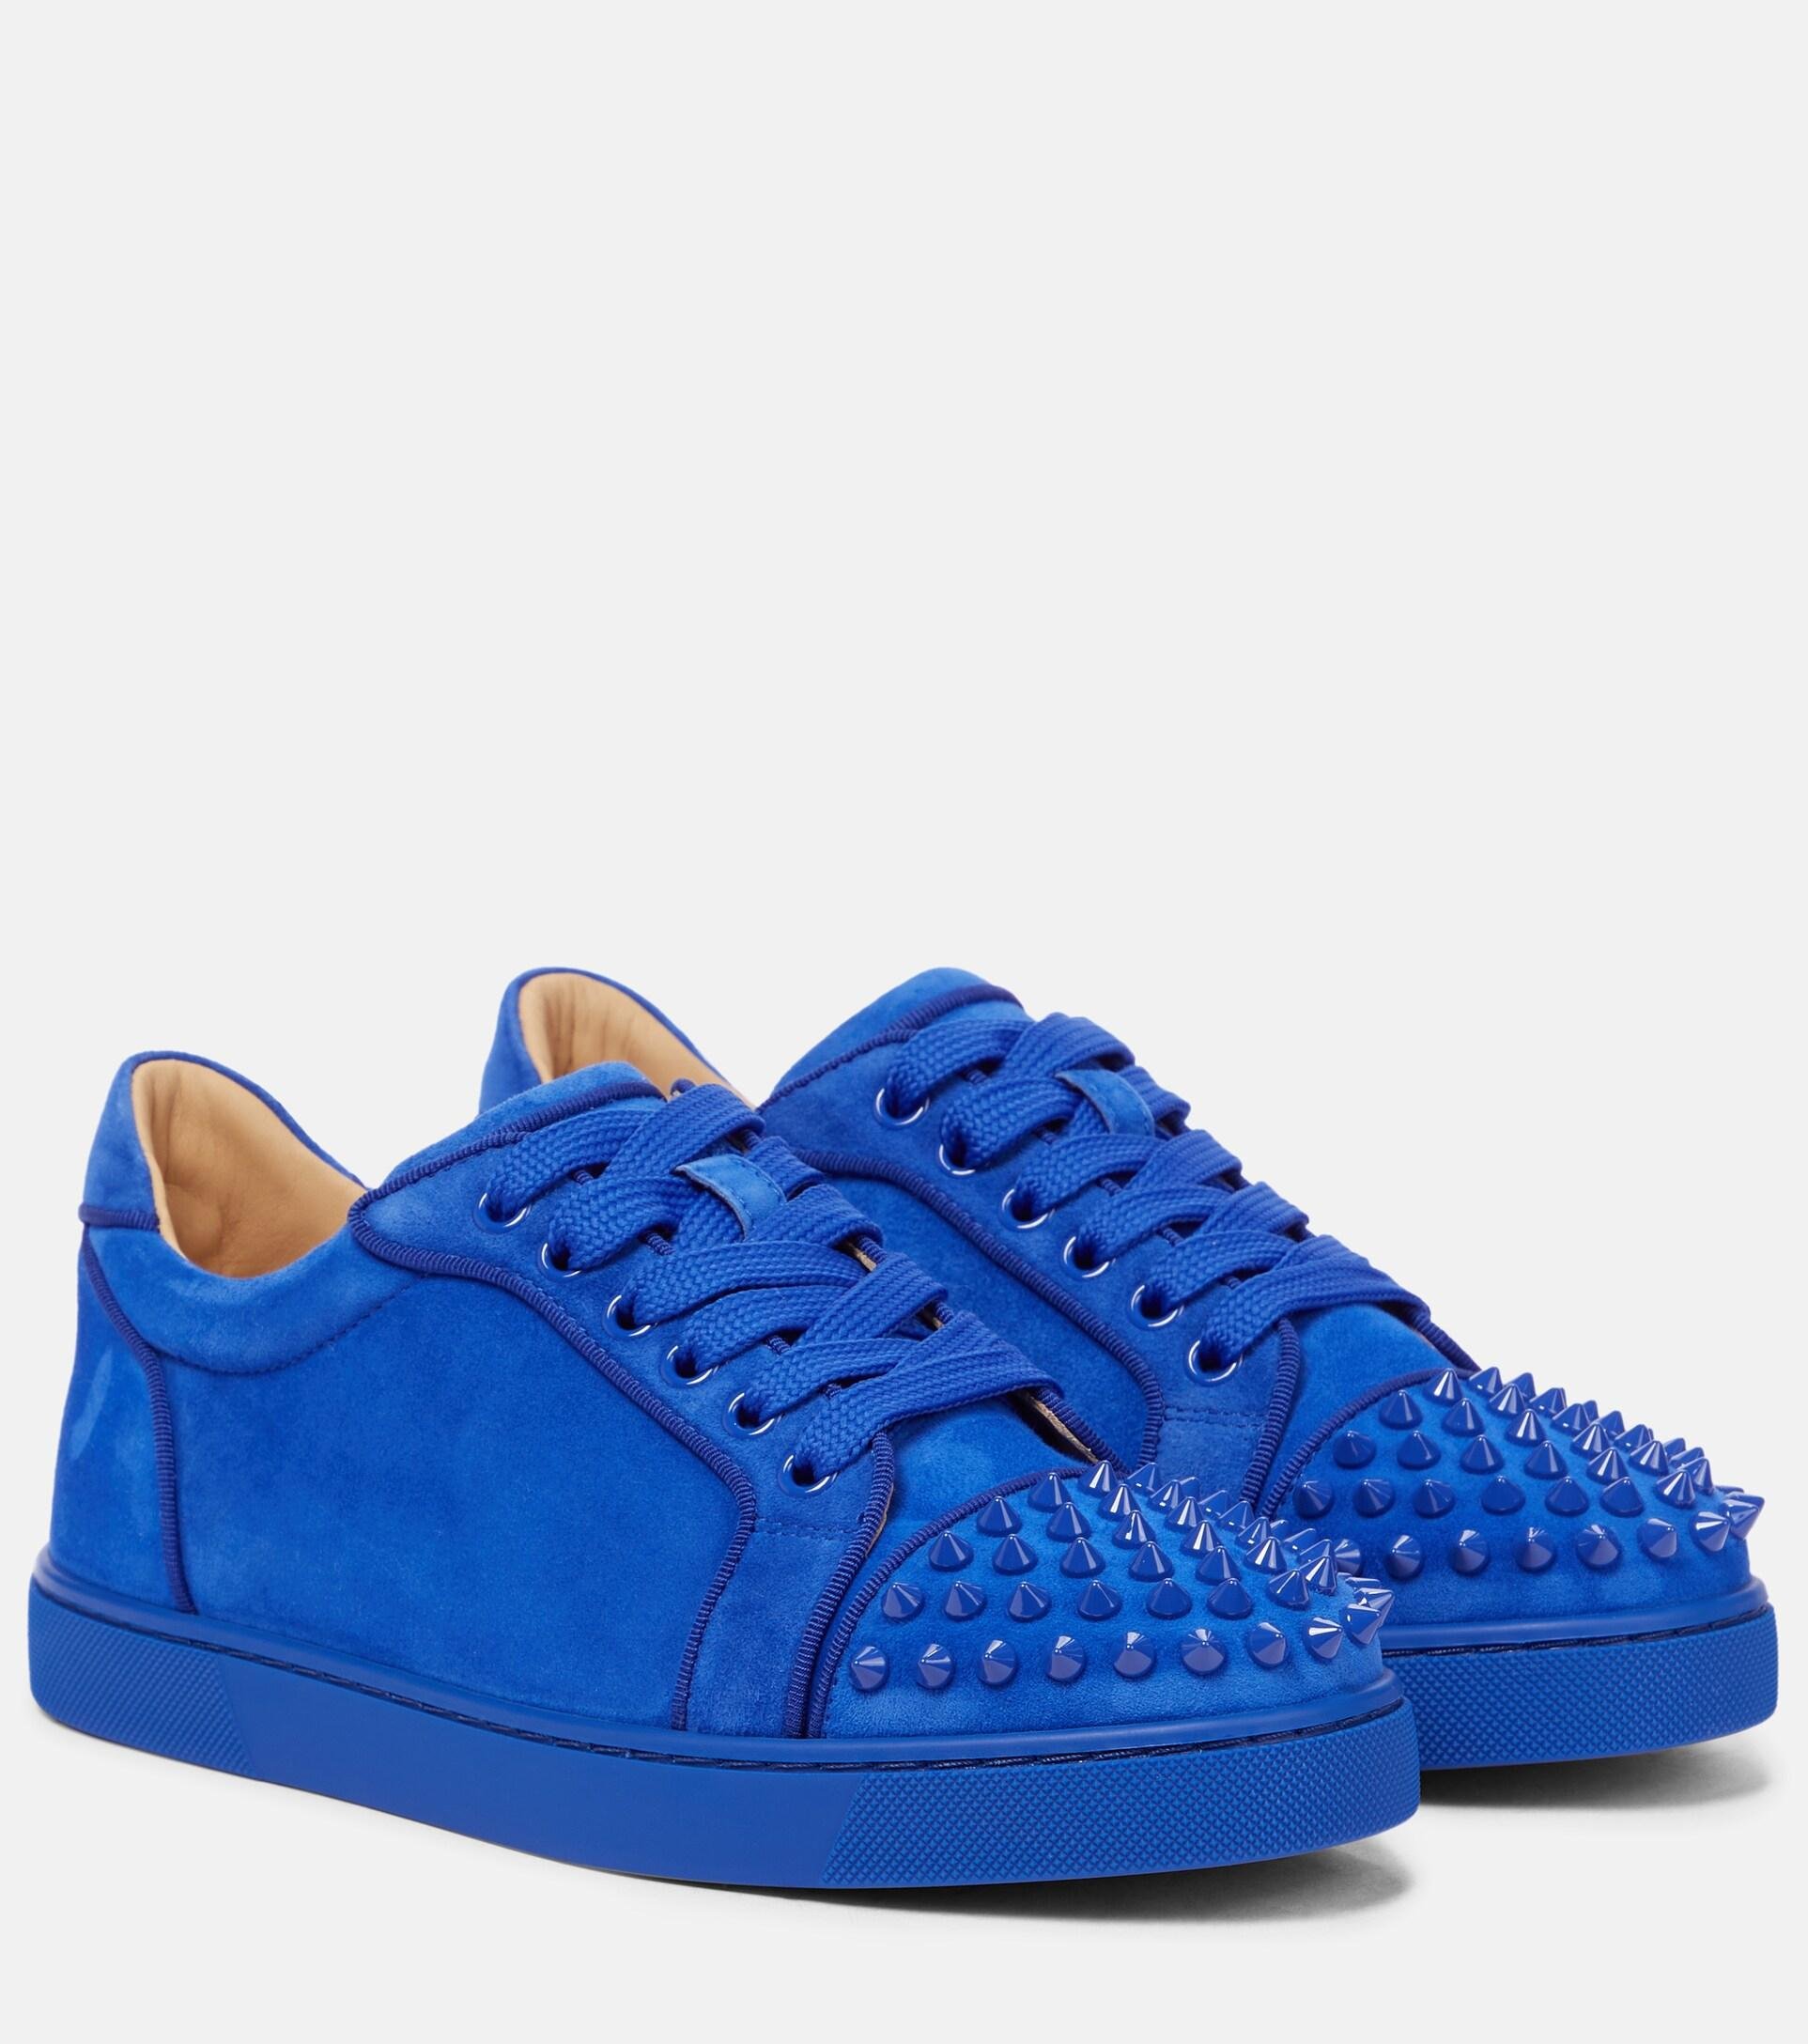 CHRISTIAN LOUBOUTIN SNEAKERS | Trunk Show Designer Consignment